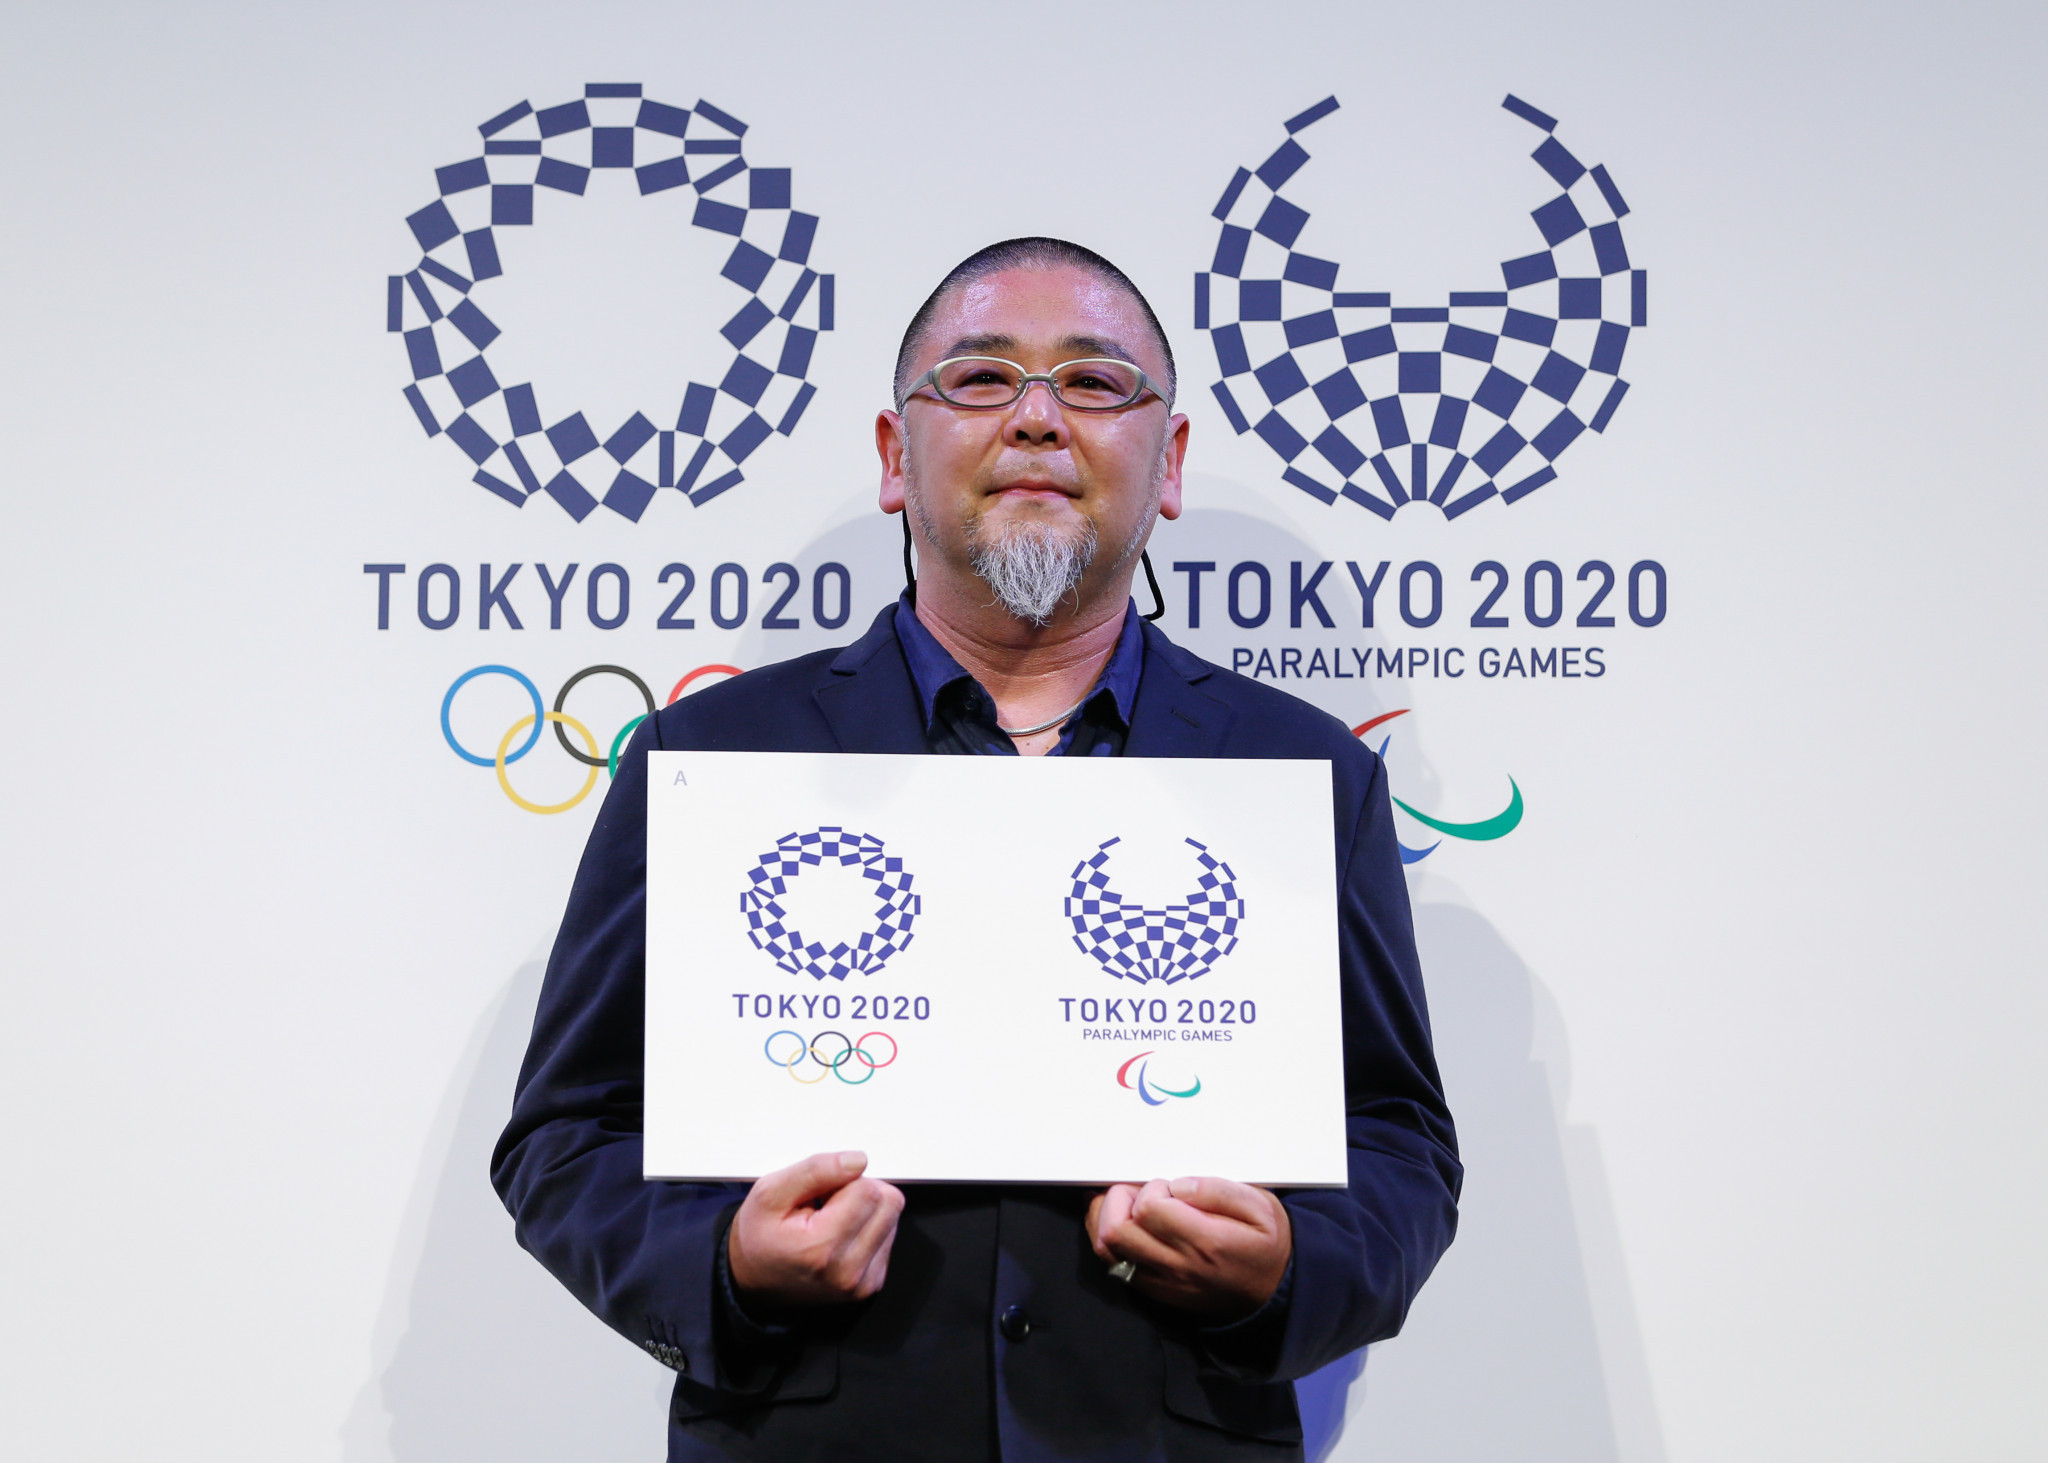 The original logos, created by Asao Tokolo for the Tokyo 2020 Games ©Getty Images